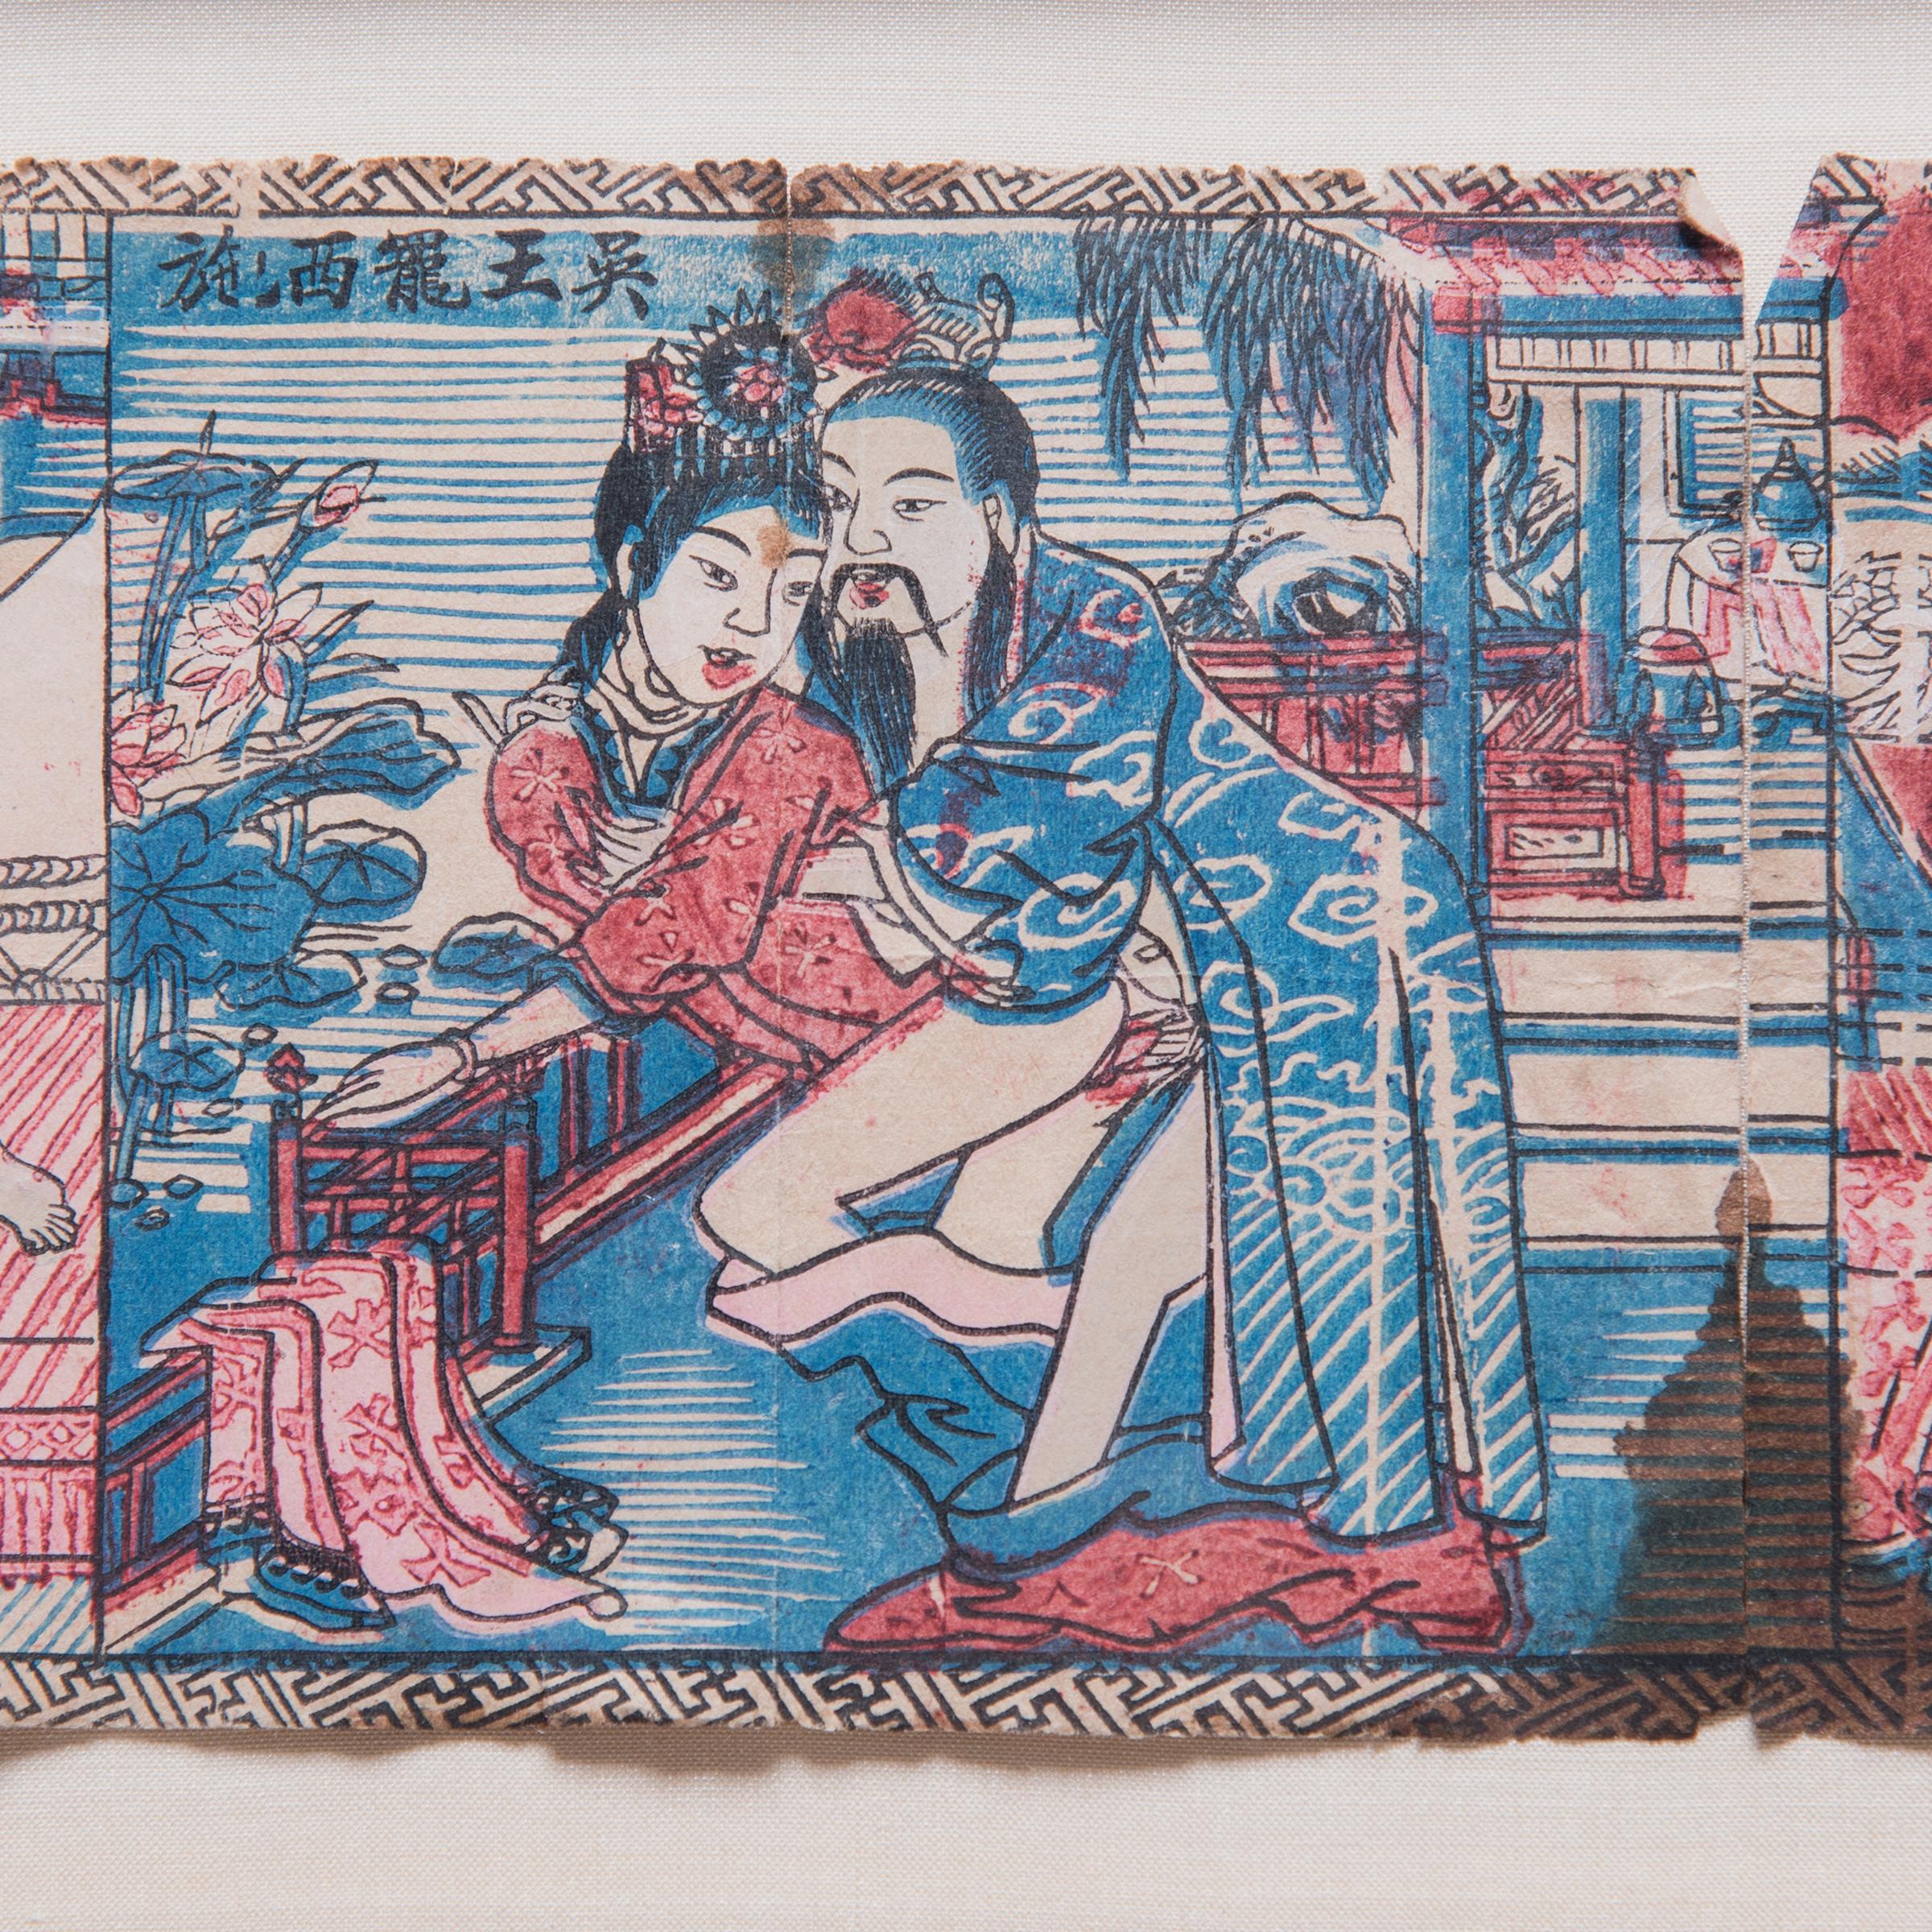 Erotically themed pillow books were often given to newlyweds in China as 